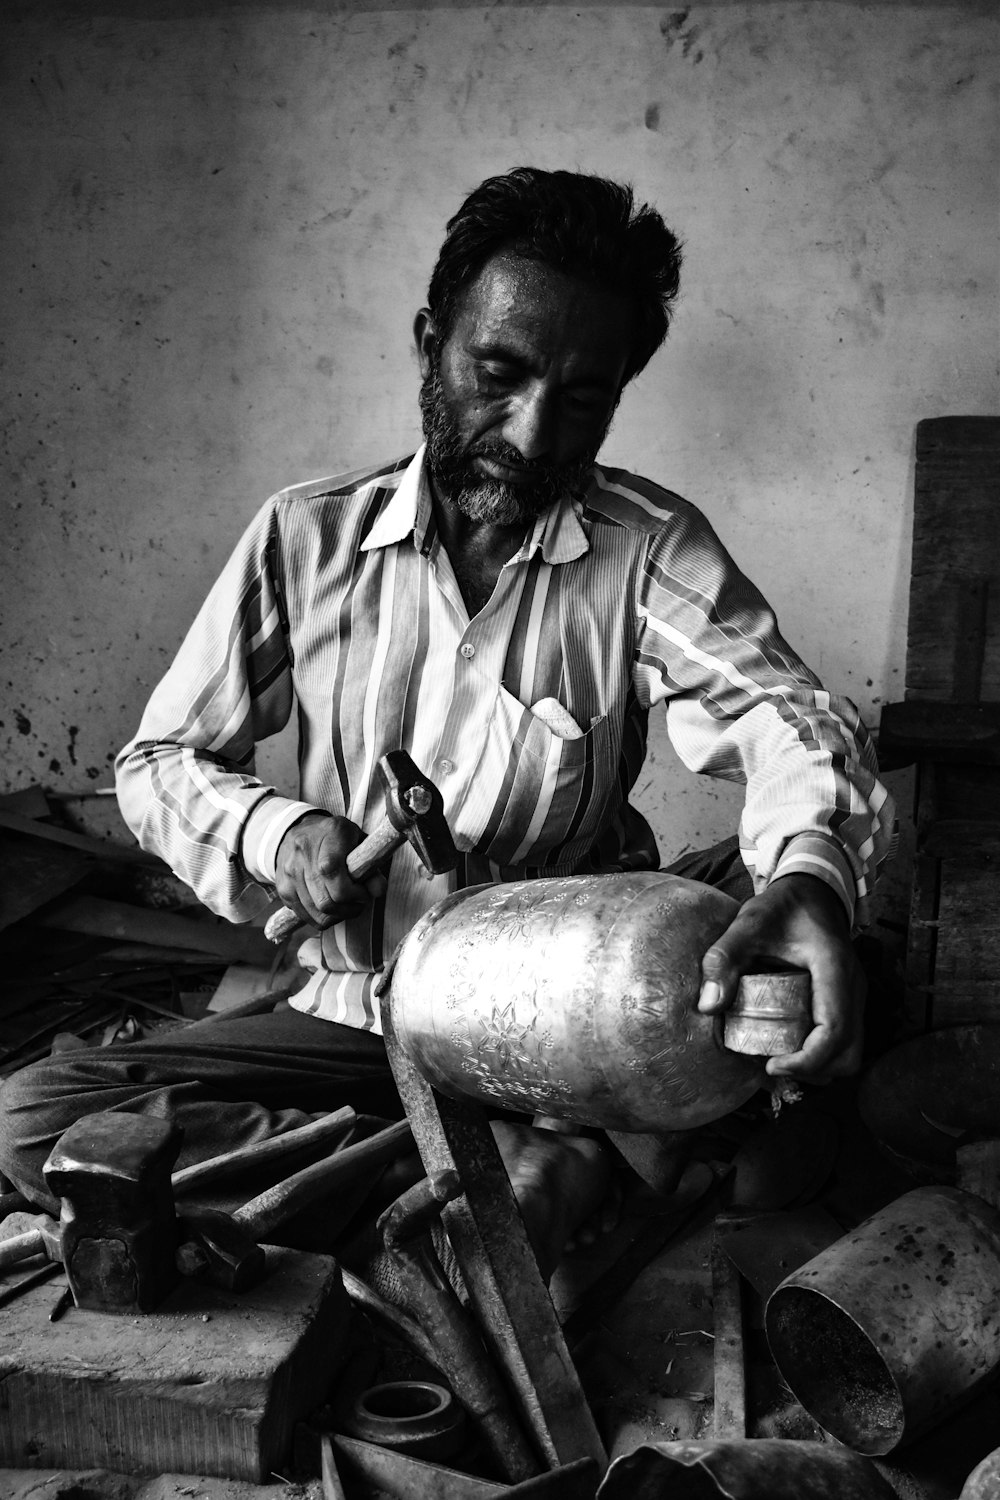 a black and white photo of a man working on a metal object